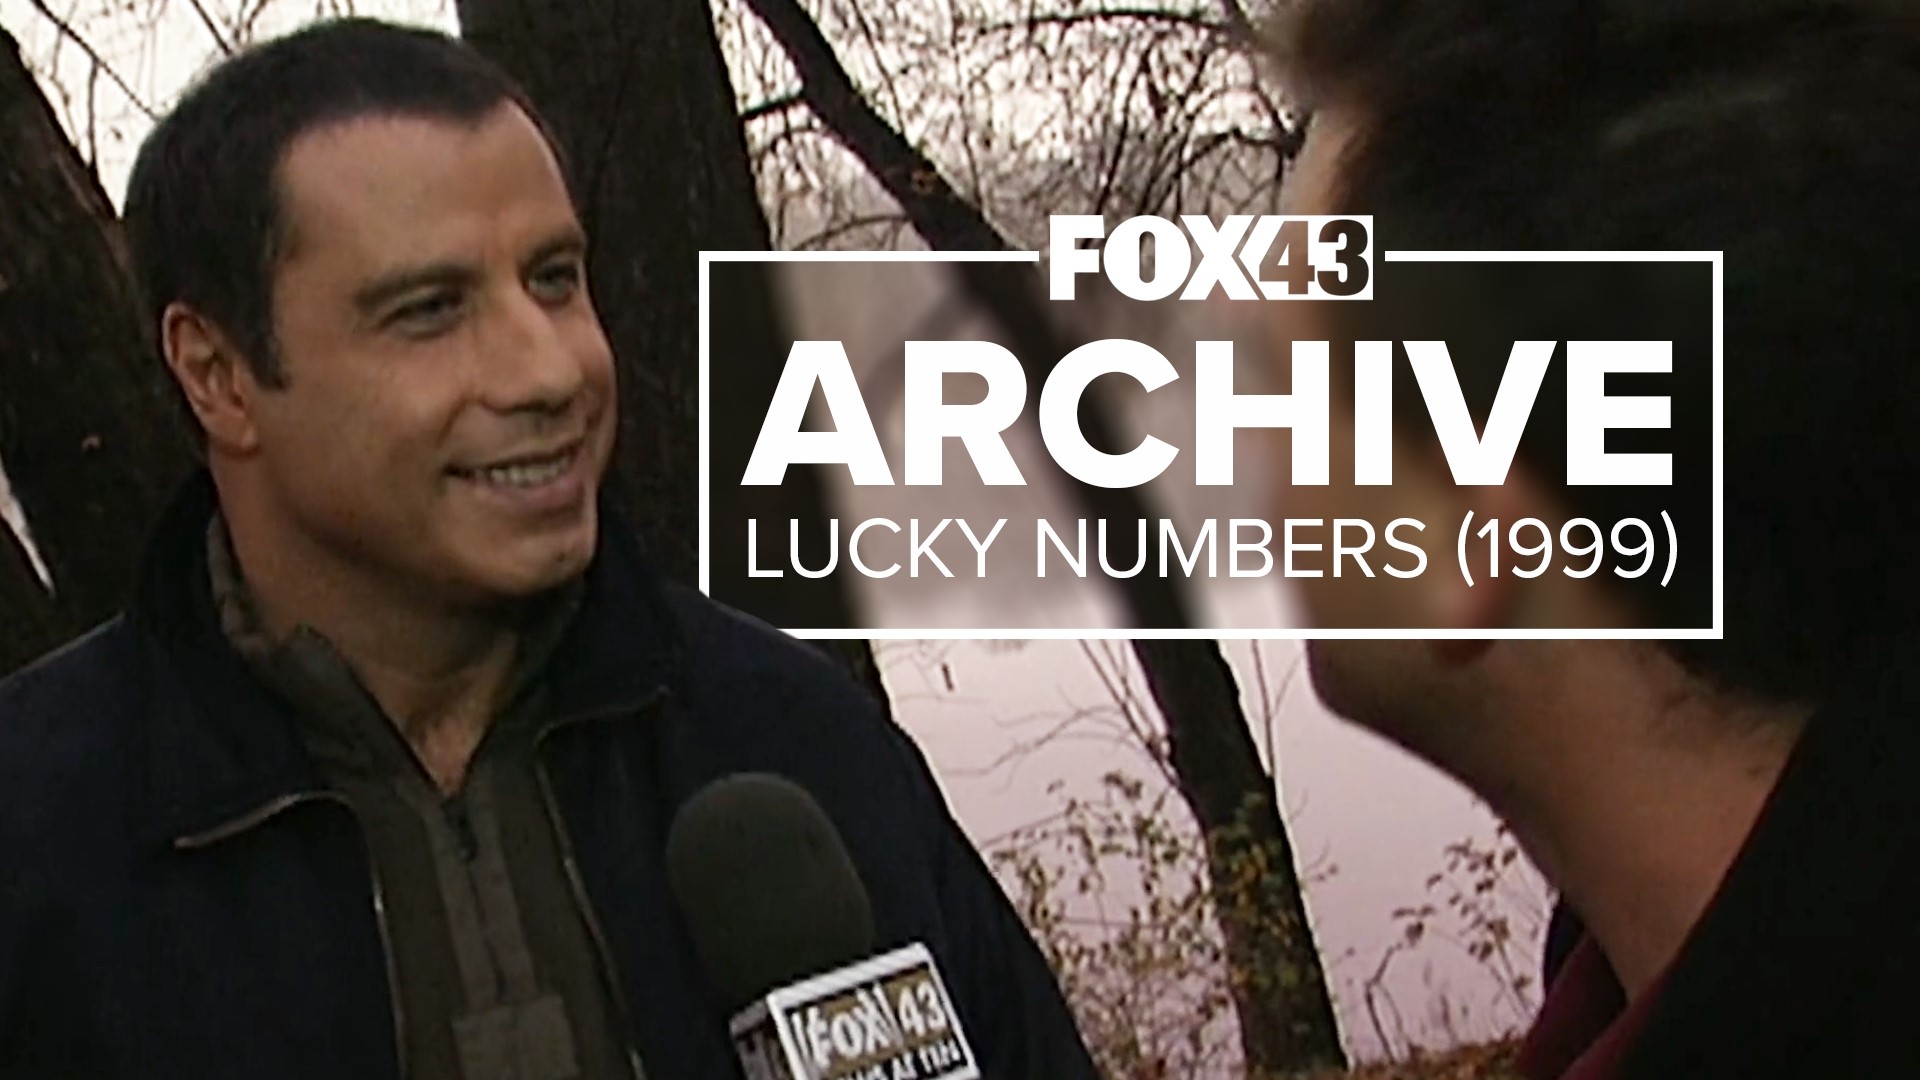 Stars like John Travolta, Lisa Kudrow and Michael Moore descended into Harrisburg in 1999 to shoot scenes for the film "Lucky Numbers" that was released in 2000.